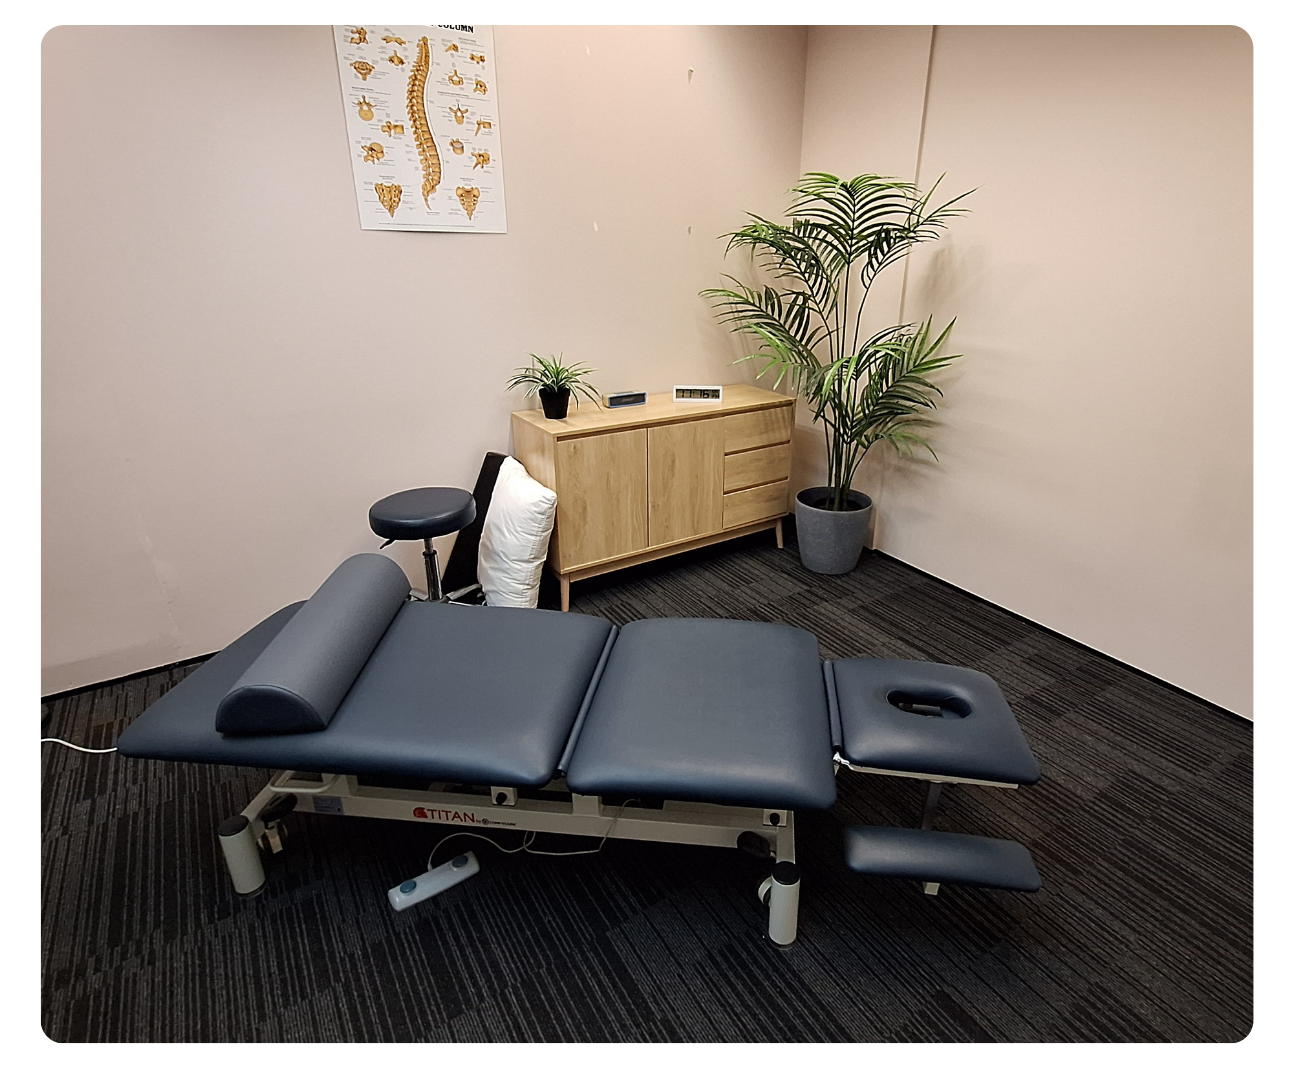 Fully equipped massage table with plush padding and professional-grade supplies.